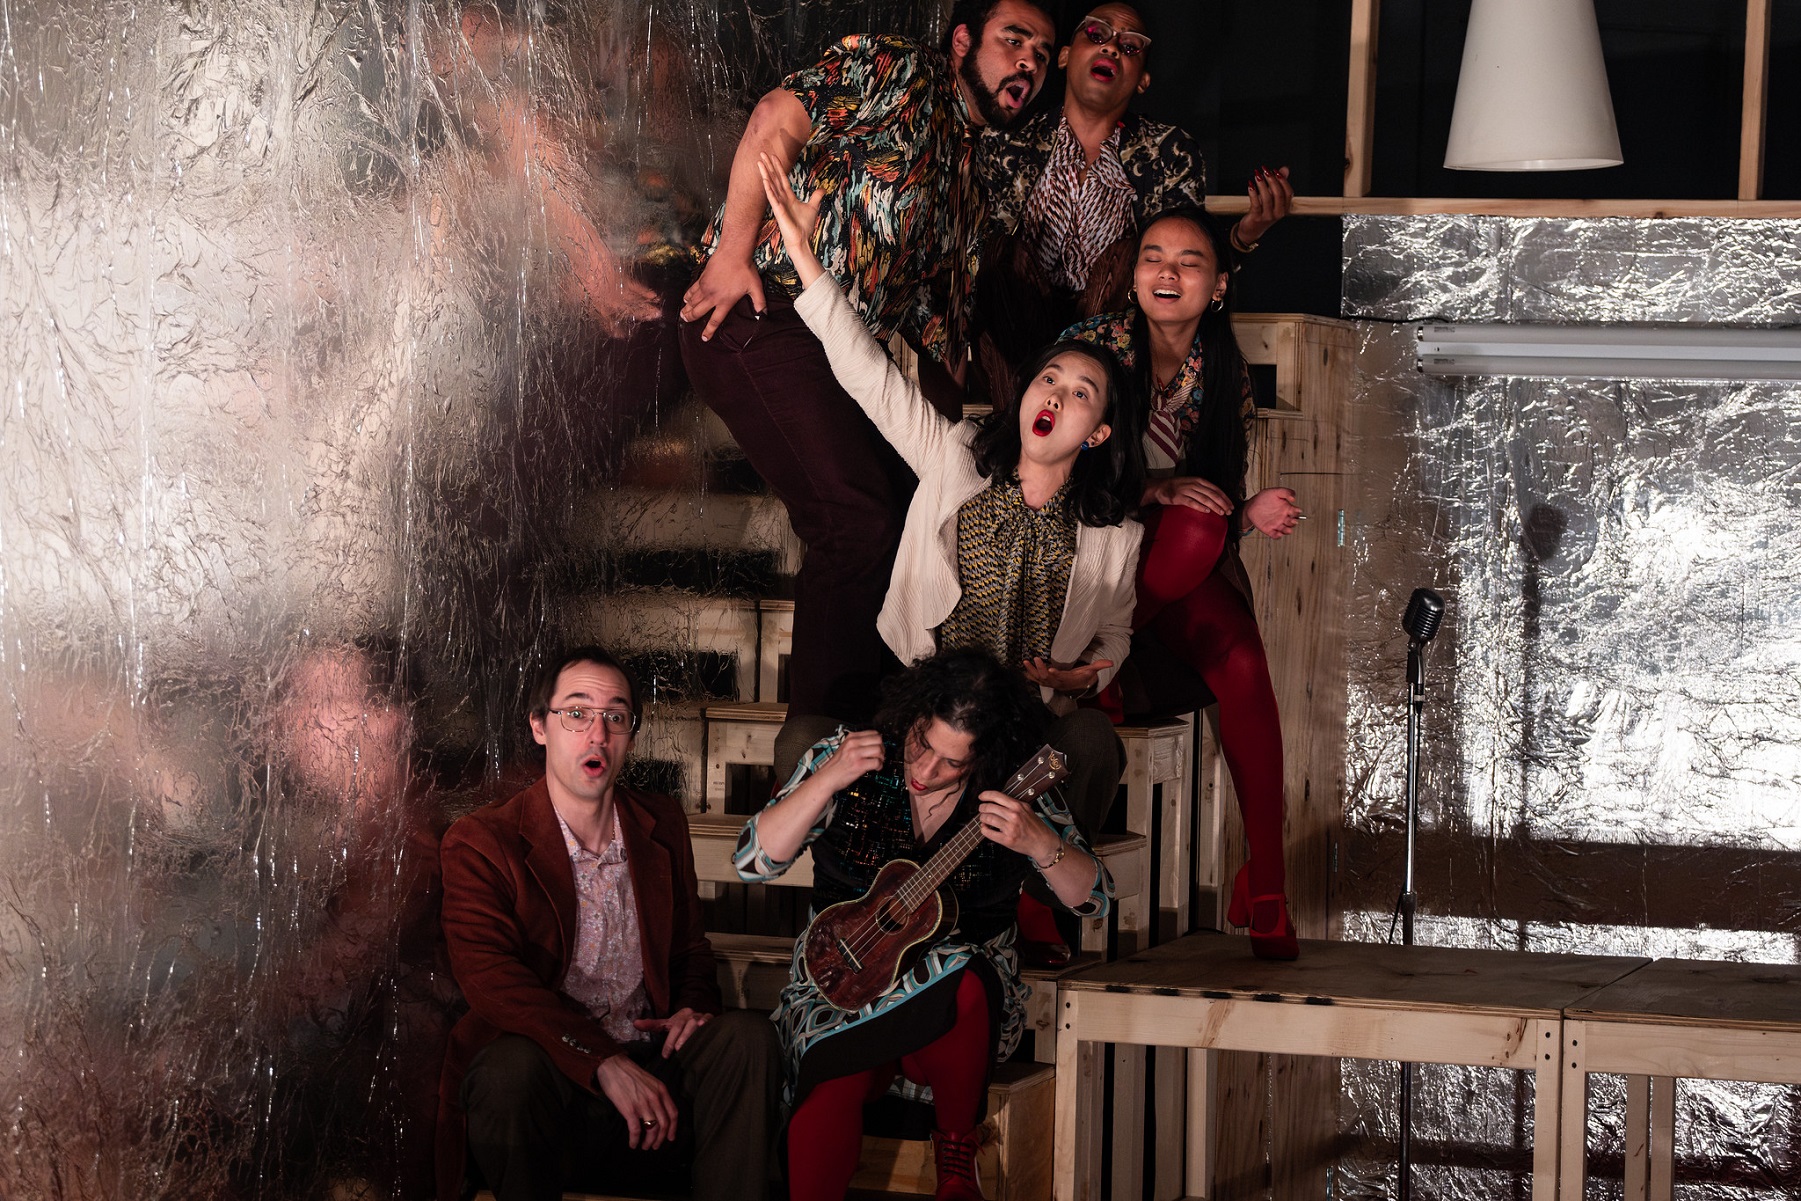 Bide Akande, Felix Mayes, Mikayla De Guzman, Seoyoung Park, Amy Gorelow, and Clifton Frei in 'Attempts on Her Life' at TUTA Theatre